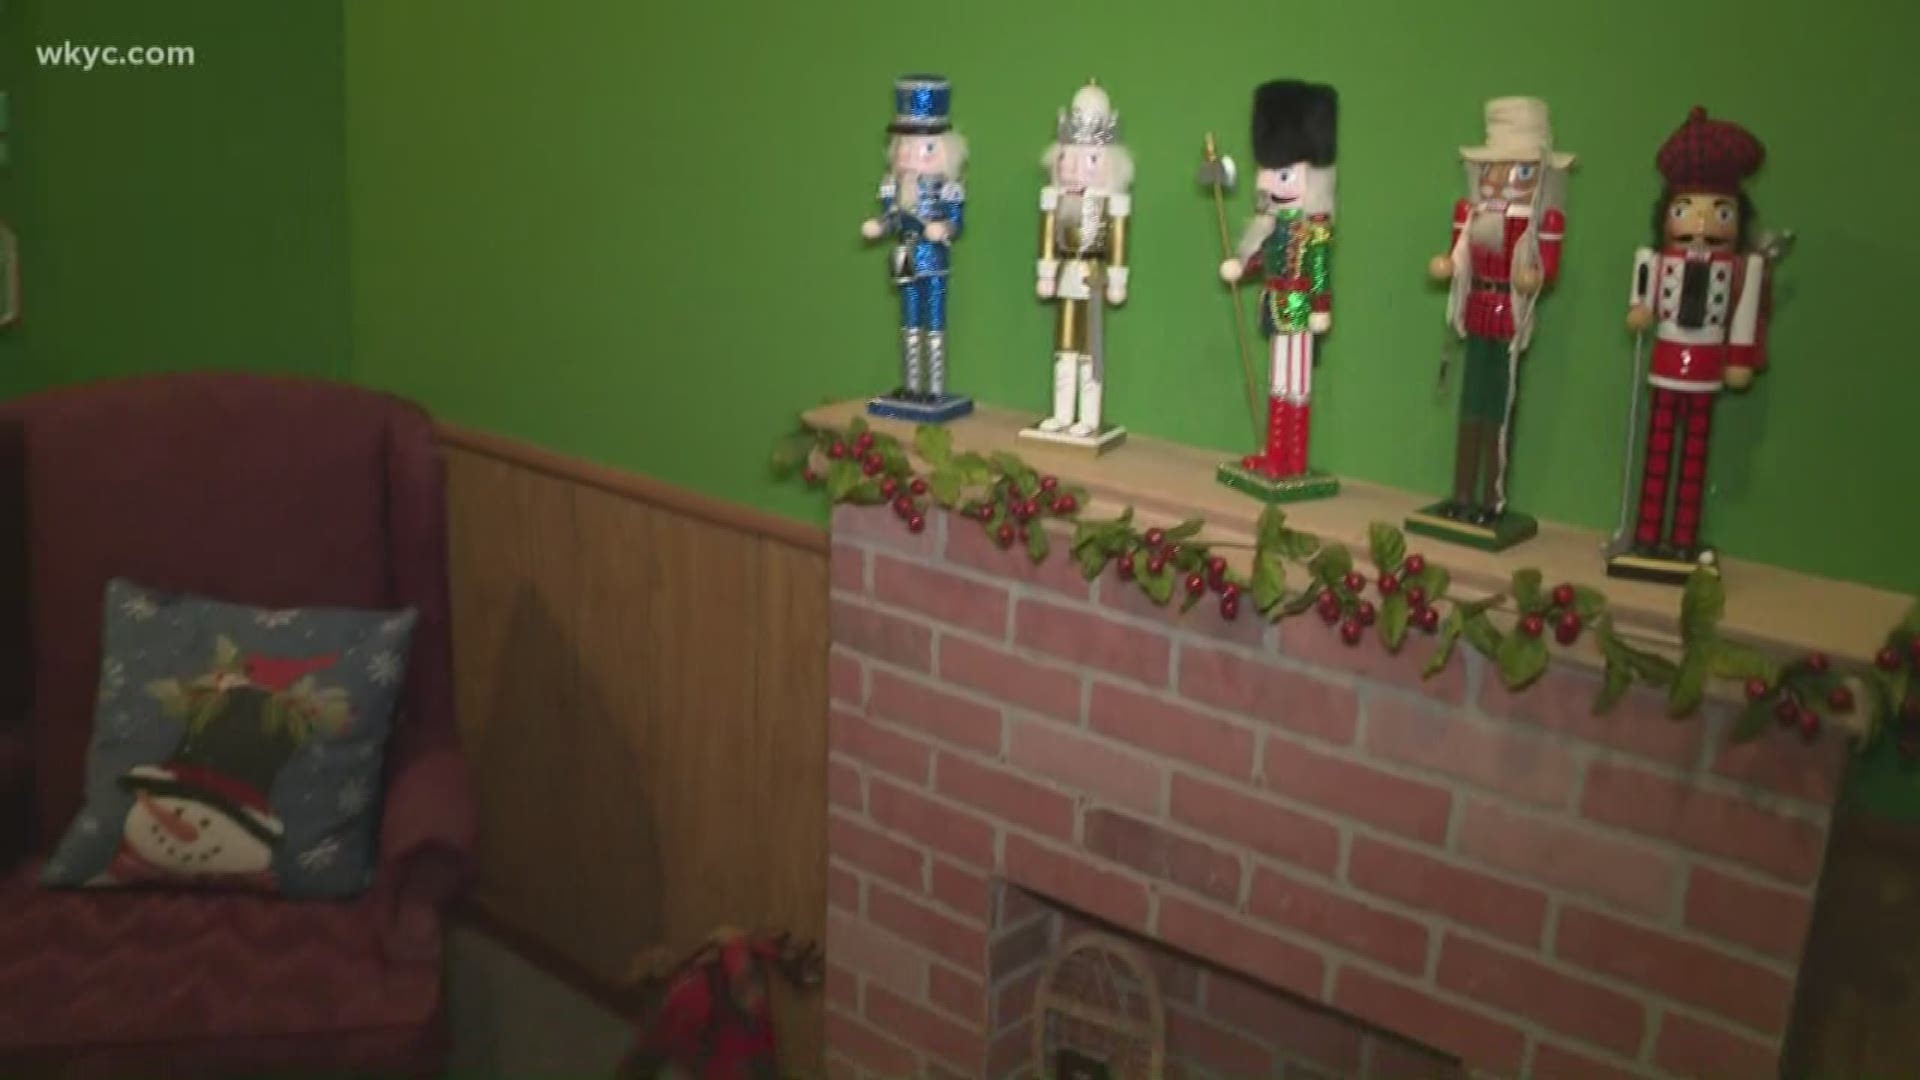 You still have time to sneak into Santa's house and take your name off that list! Lindsay Buckingham reports.